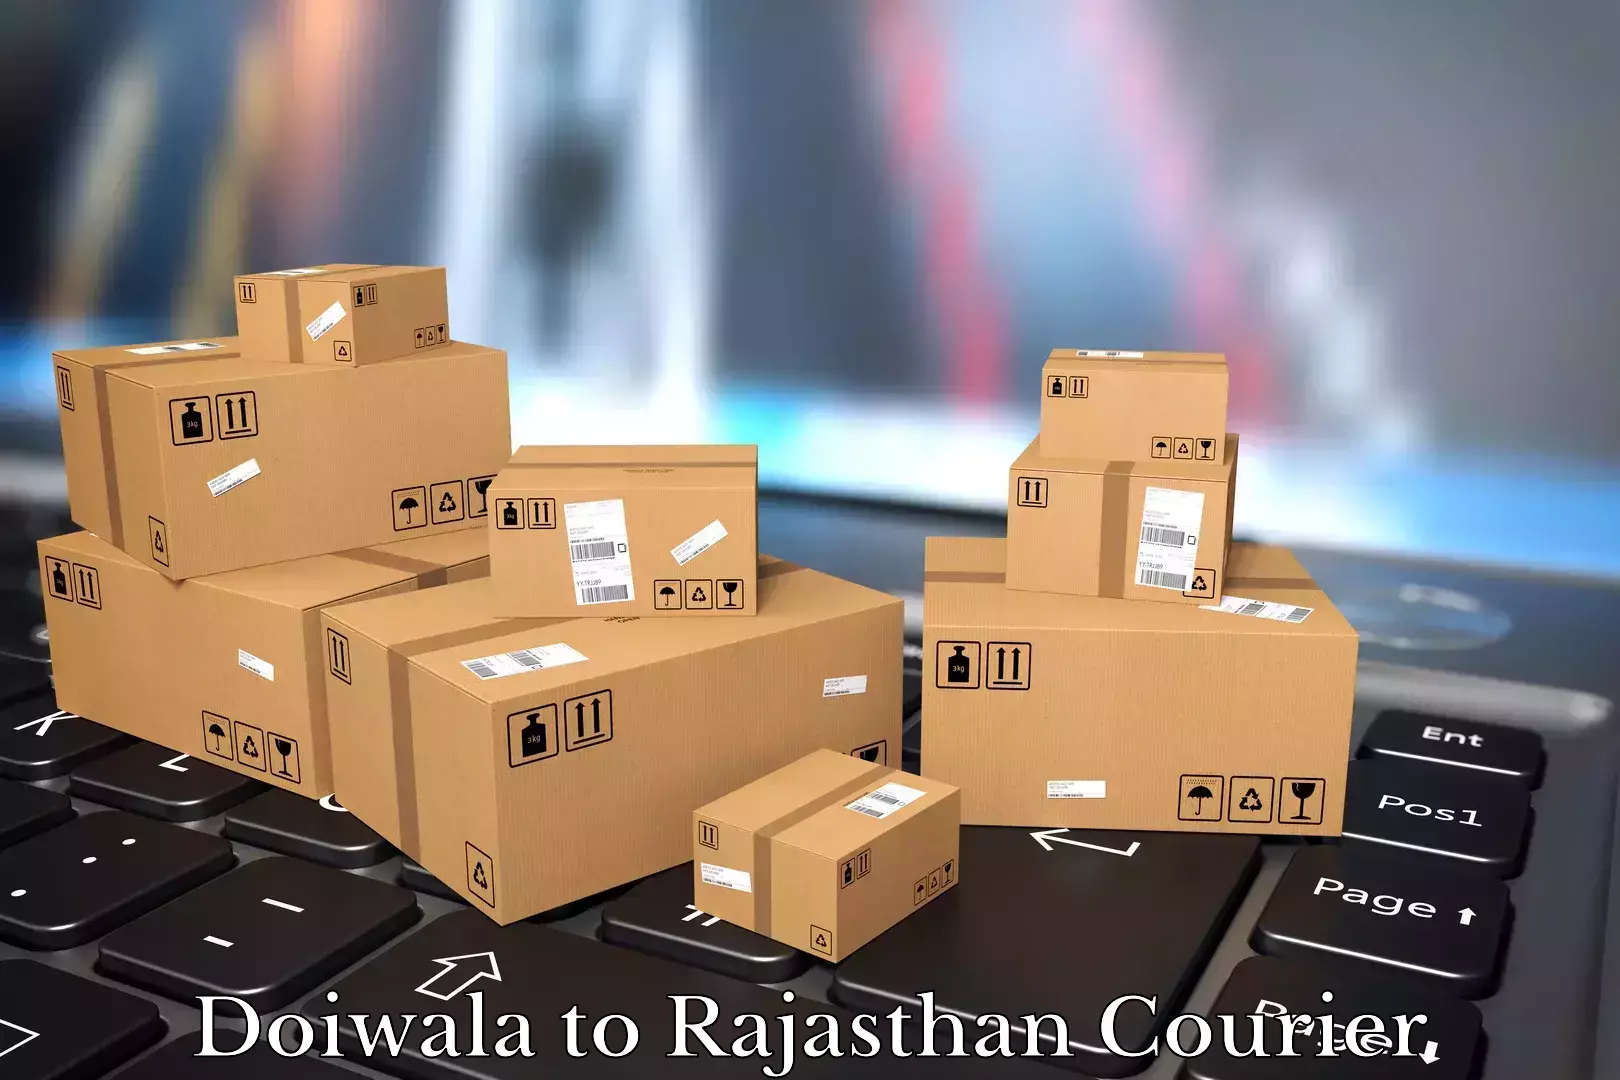 Furniture delivery service Doiwala to Udaipur